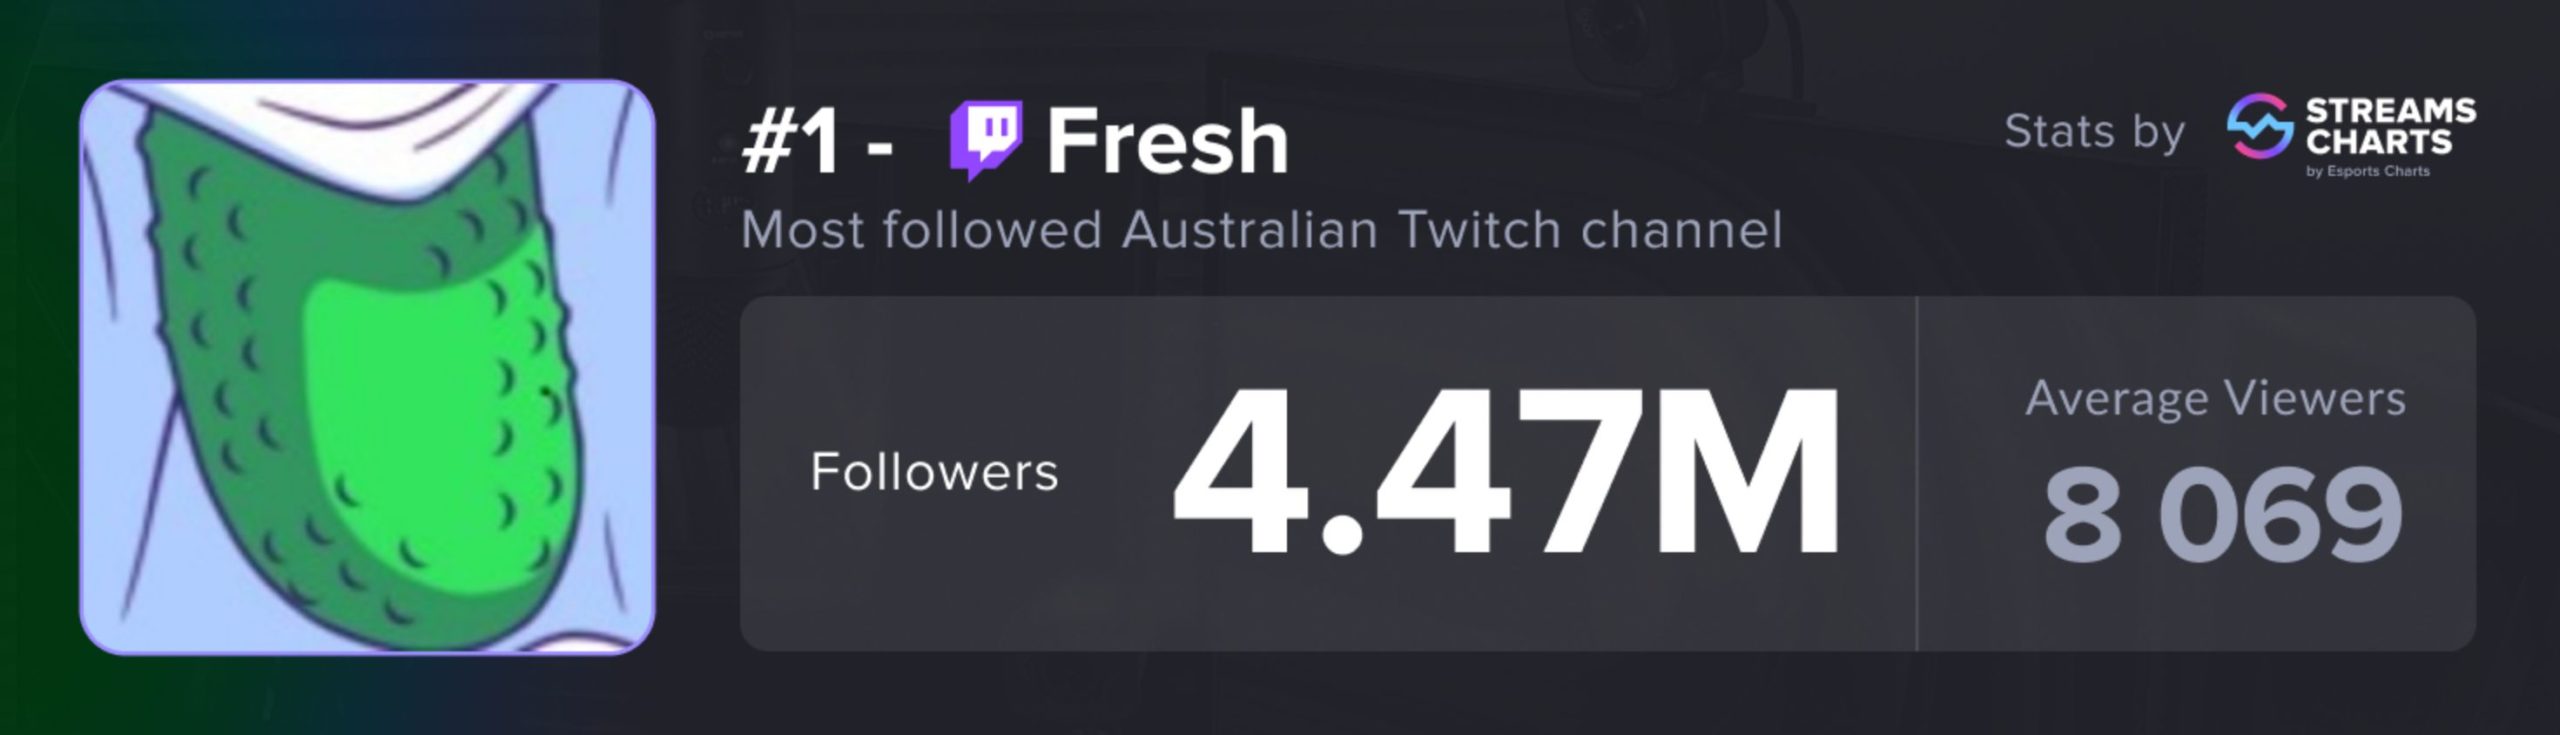 Fresh - Twitch Ratings